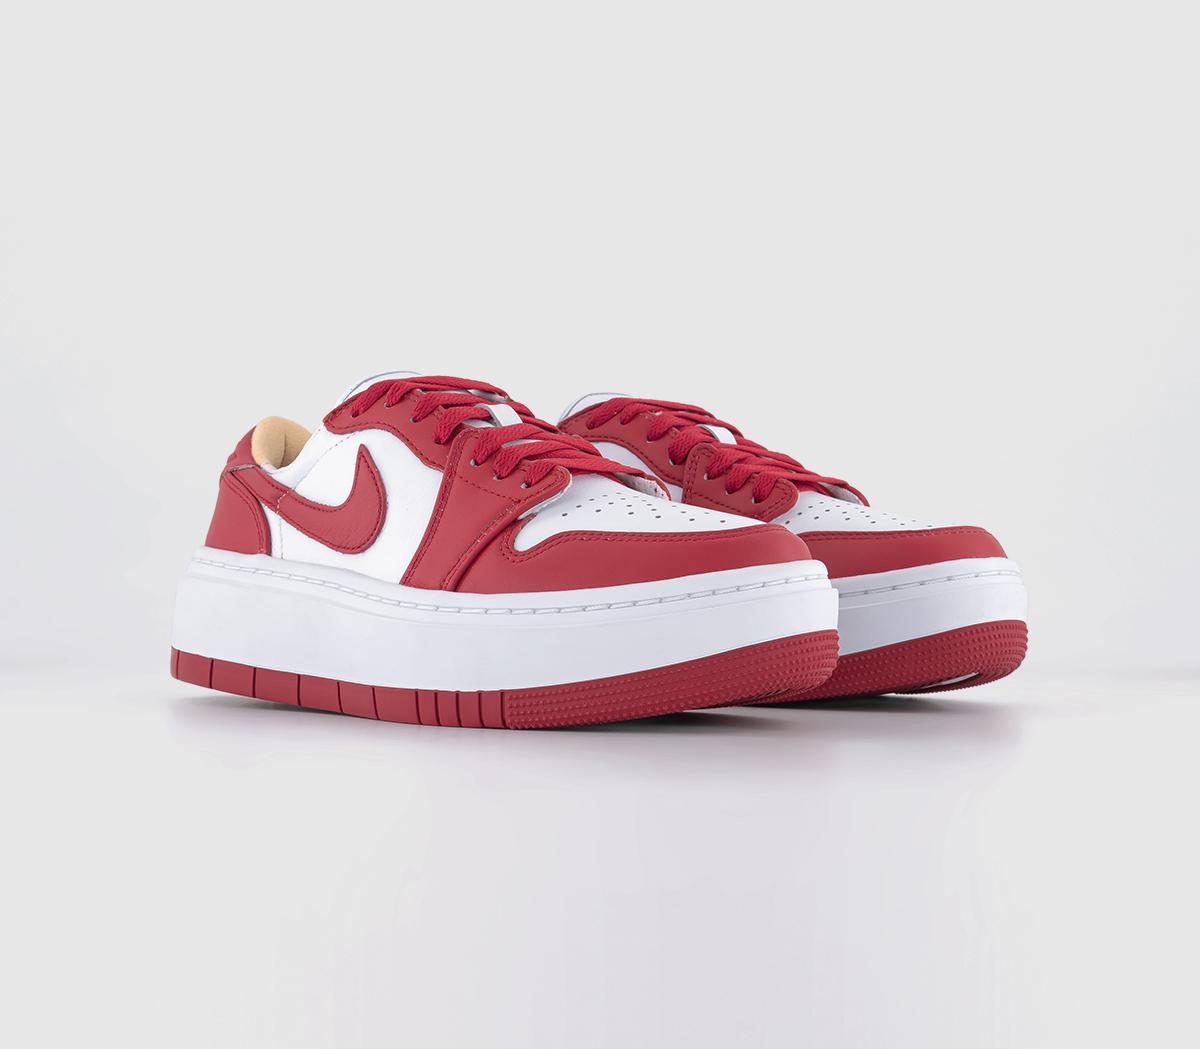 Jordan Womens Air 1 Elevate Low Trainers White Fire Red White, 3